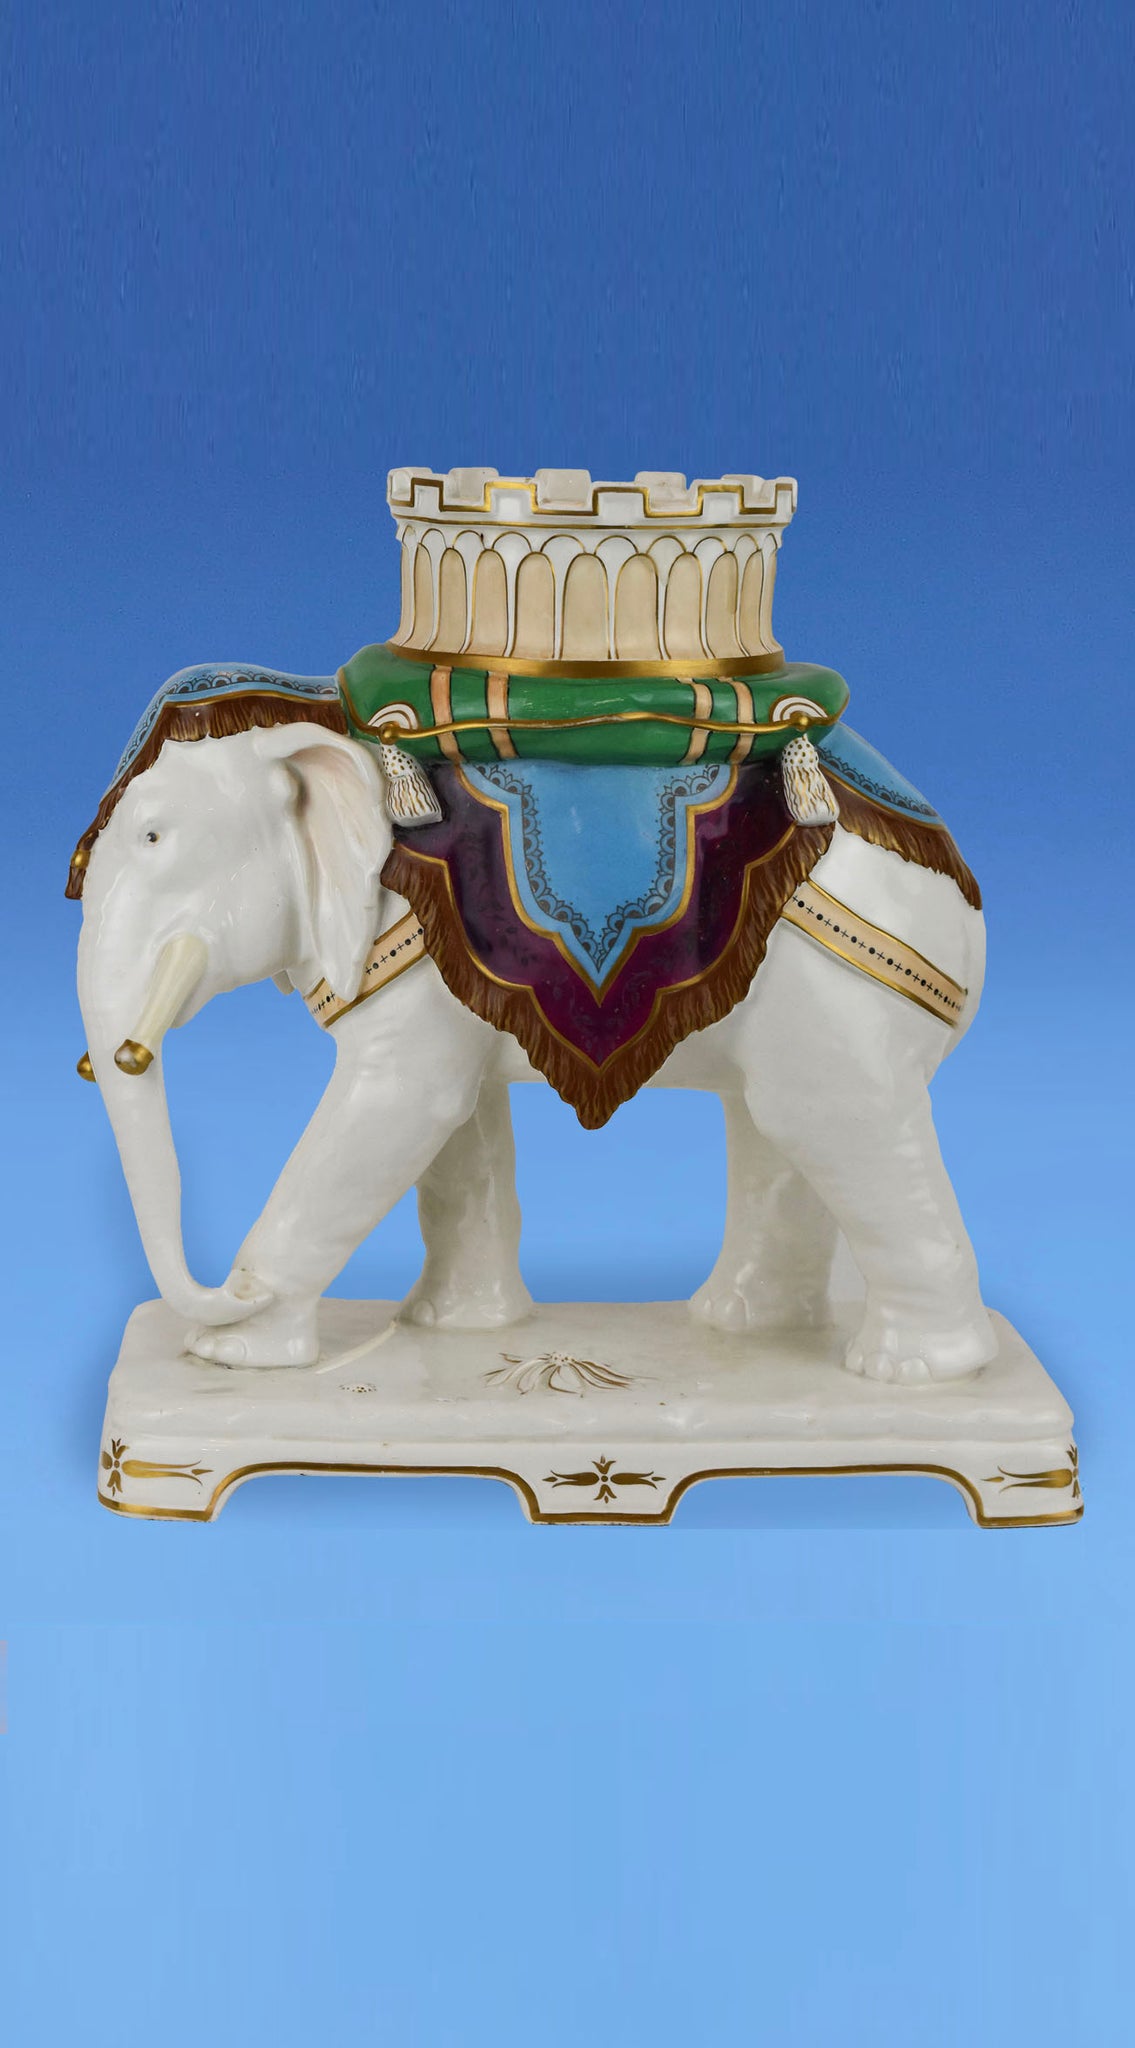 Rare William Brownfield and Sons Ceremonial Elephant Plant Holder c.1870